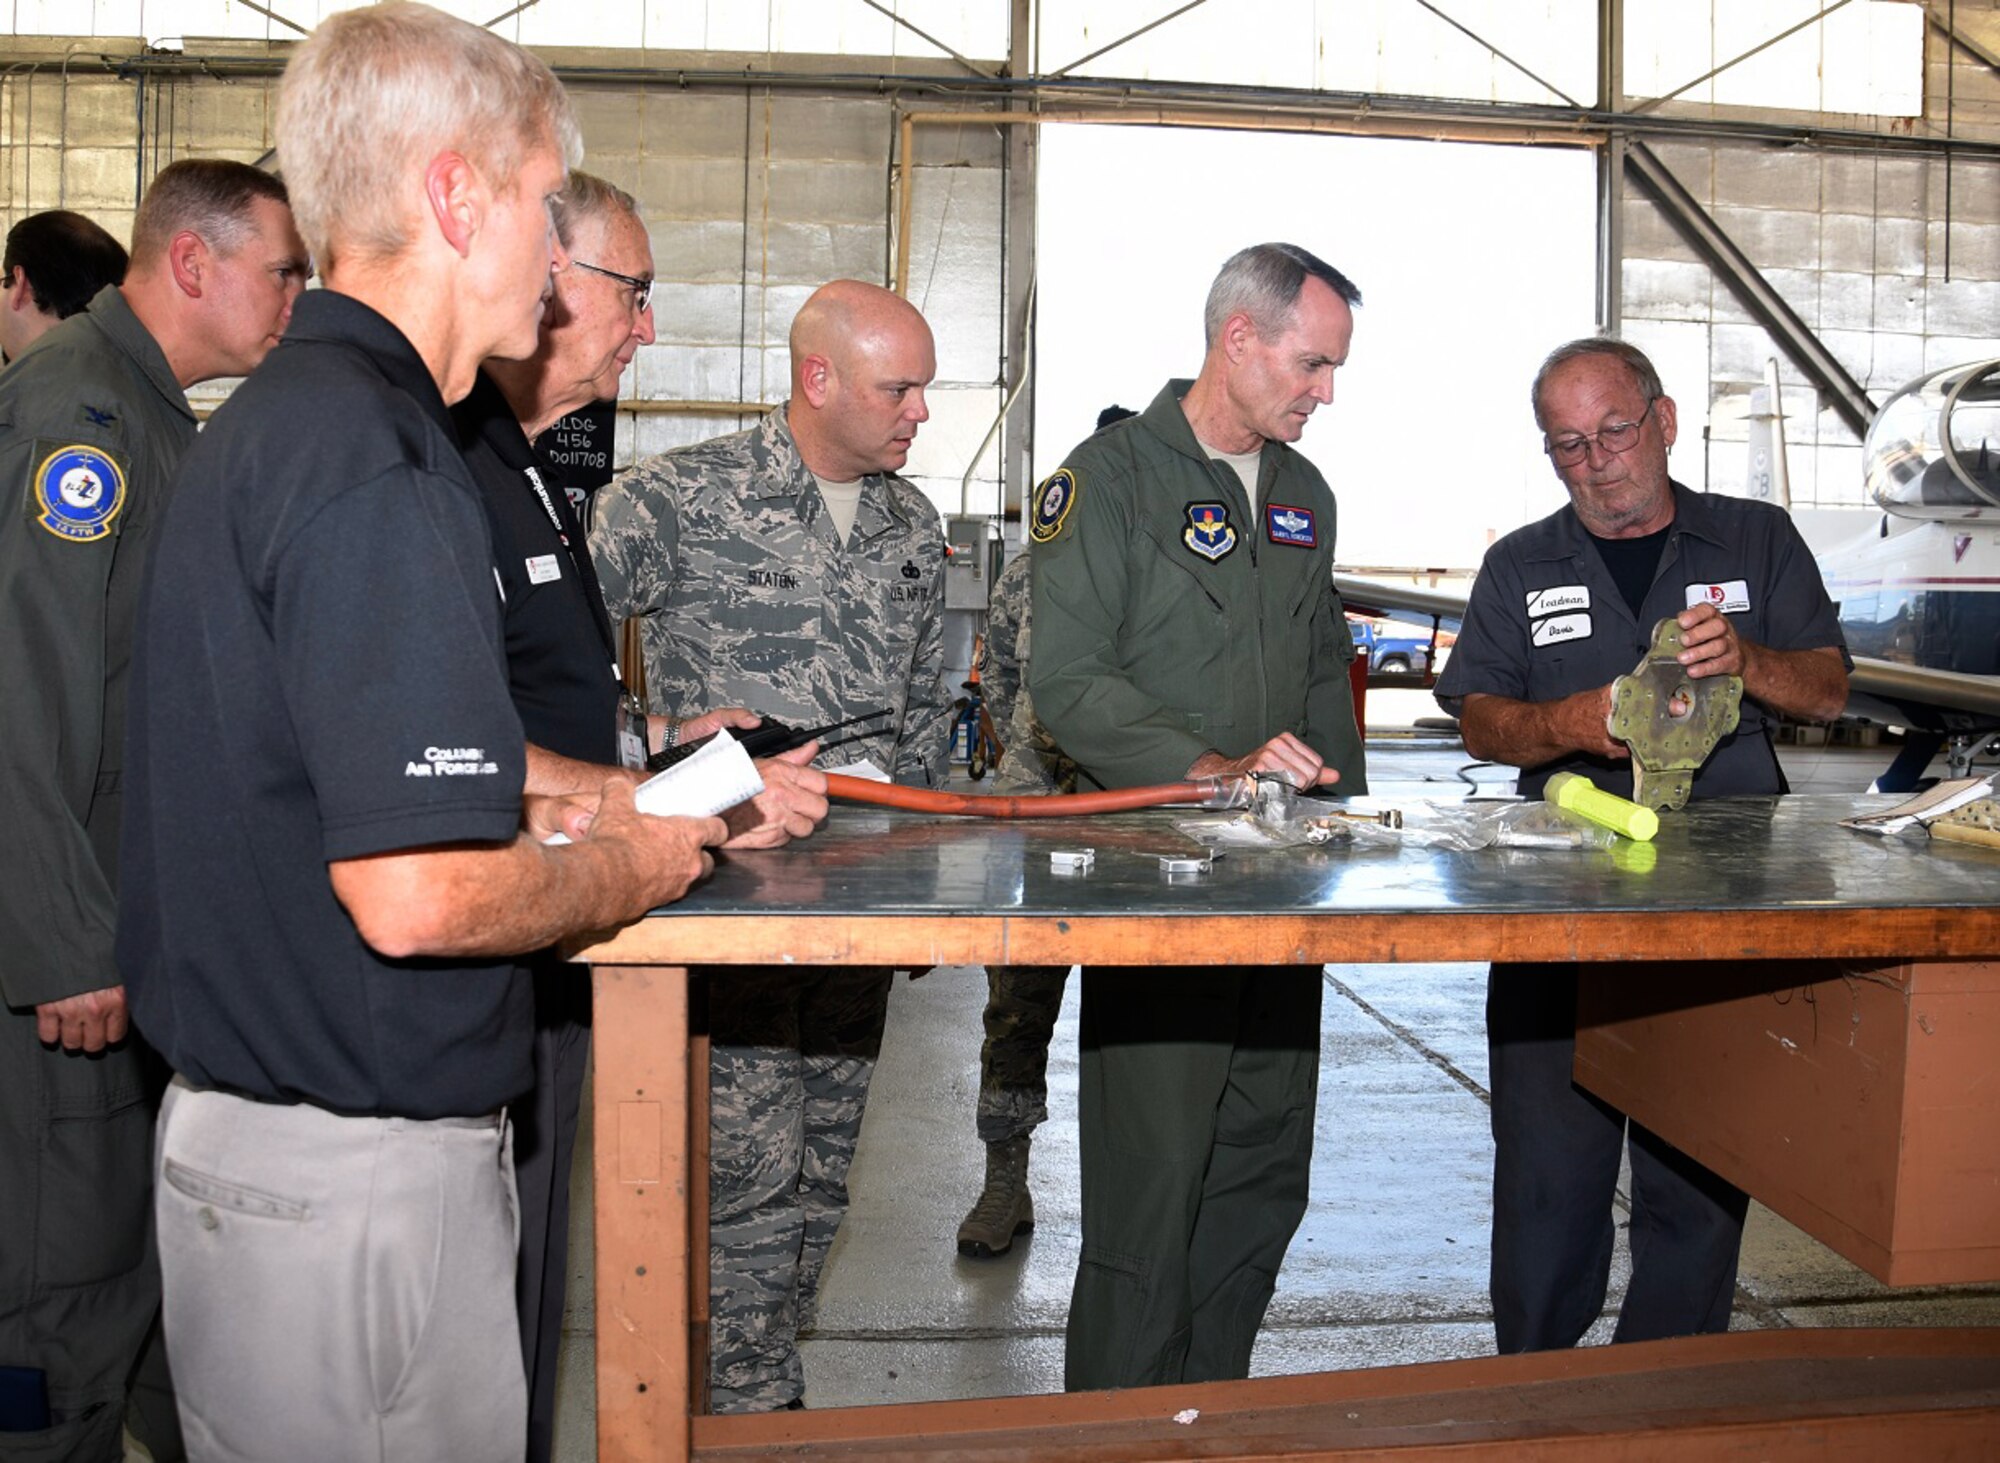 Jeff Davis, L3 Vertex Aerospace T-6 lead mechanic, briefs Lt. Gen. Darryl Roberson, commander of Air Education and Training Command, Chief Master Sgt. David Staton, AETC command chief, and base leaders, about T-6 landing gear trunnion fittings Sept. 12, 2016, at Columbus Air Force Base, Mississippi. Roberson had the opportunity to get an extensive look at what makes the T-6 an aerial asset for AETC. (U.S. Air Force photo by Elizabeth Owens)